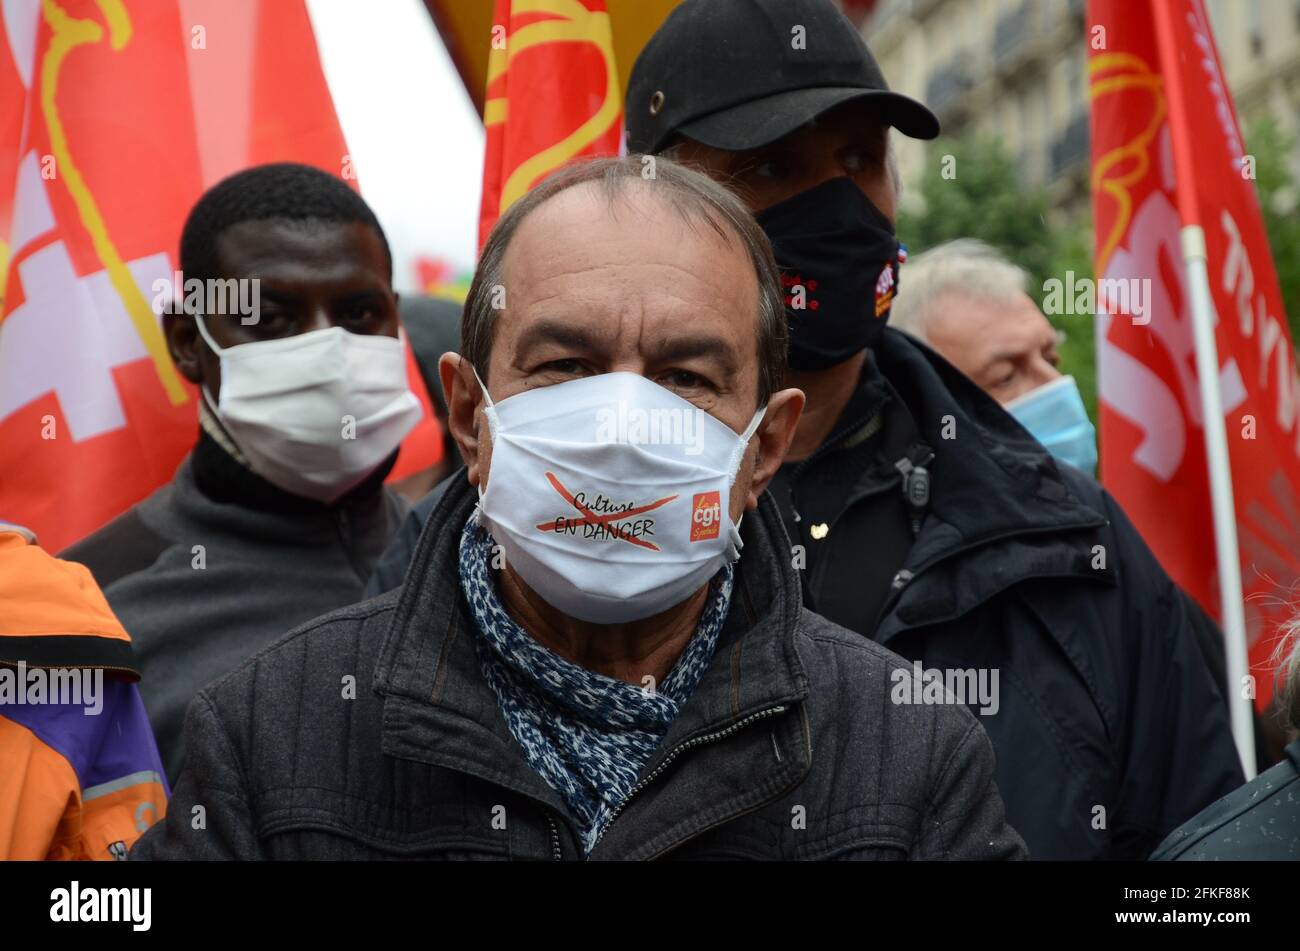 May Day parade in Paris, in a climate of tension from the start. Blackbocks' hindered the smooth running of the trade unions' march despite police Stock Photo